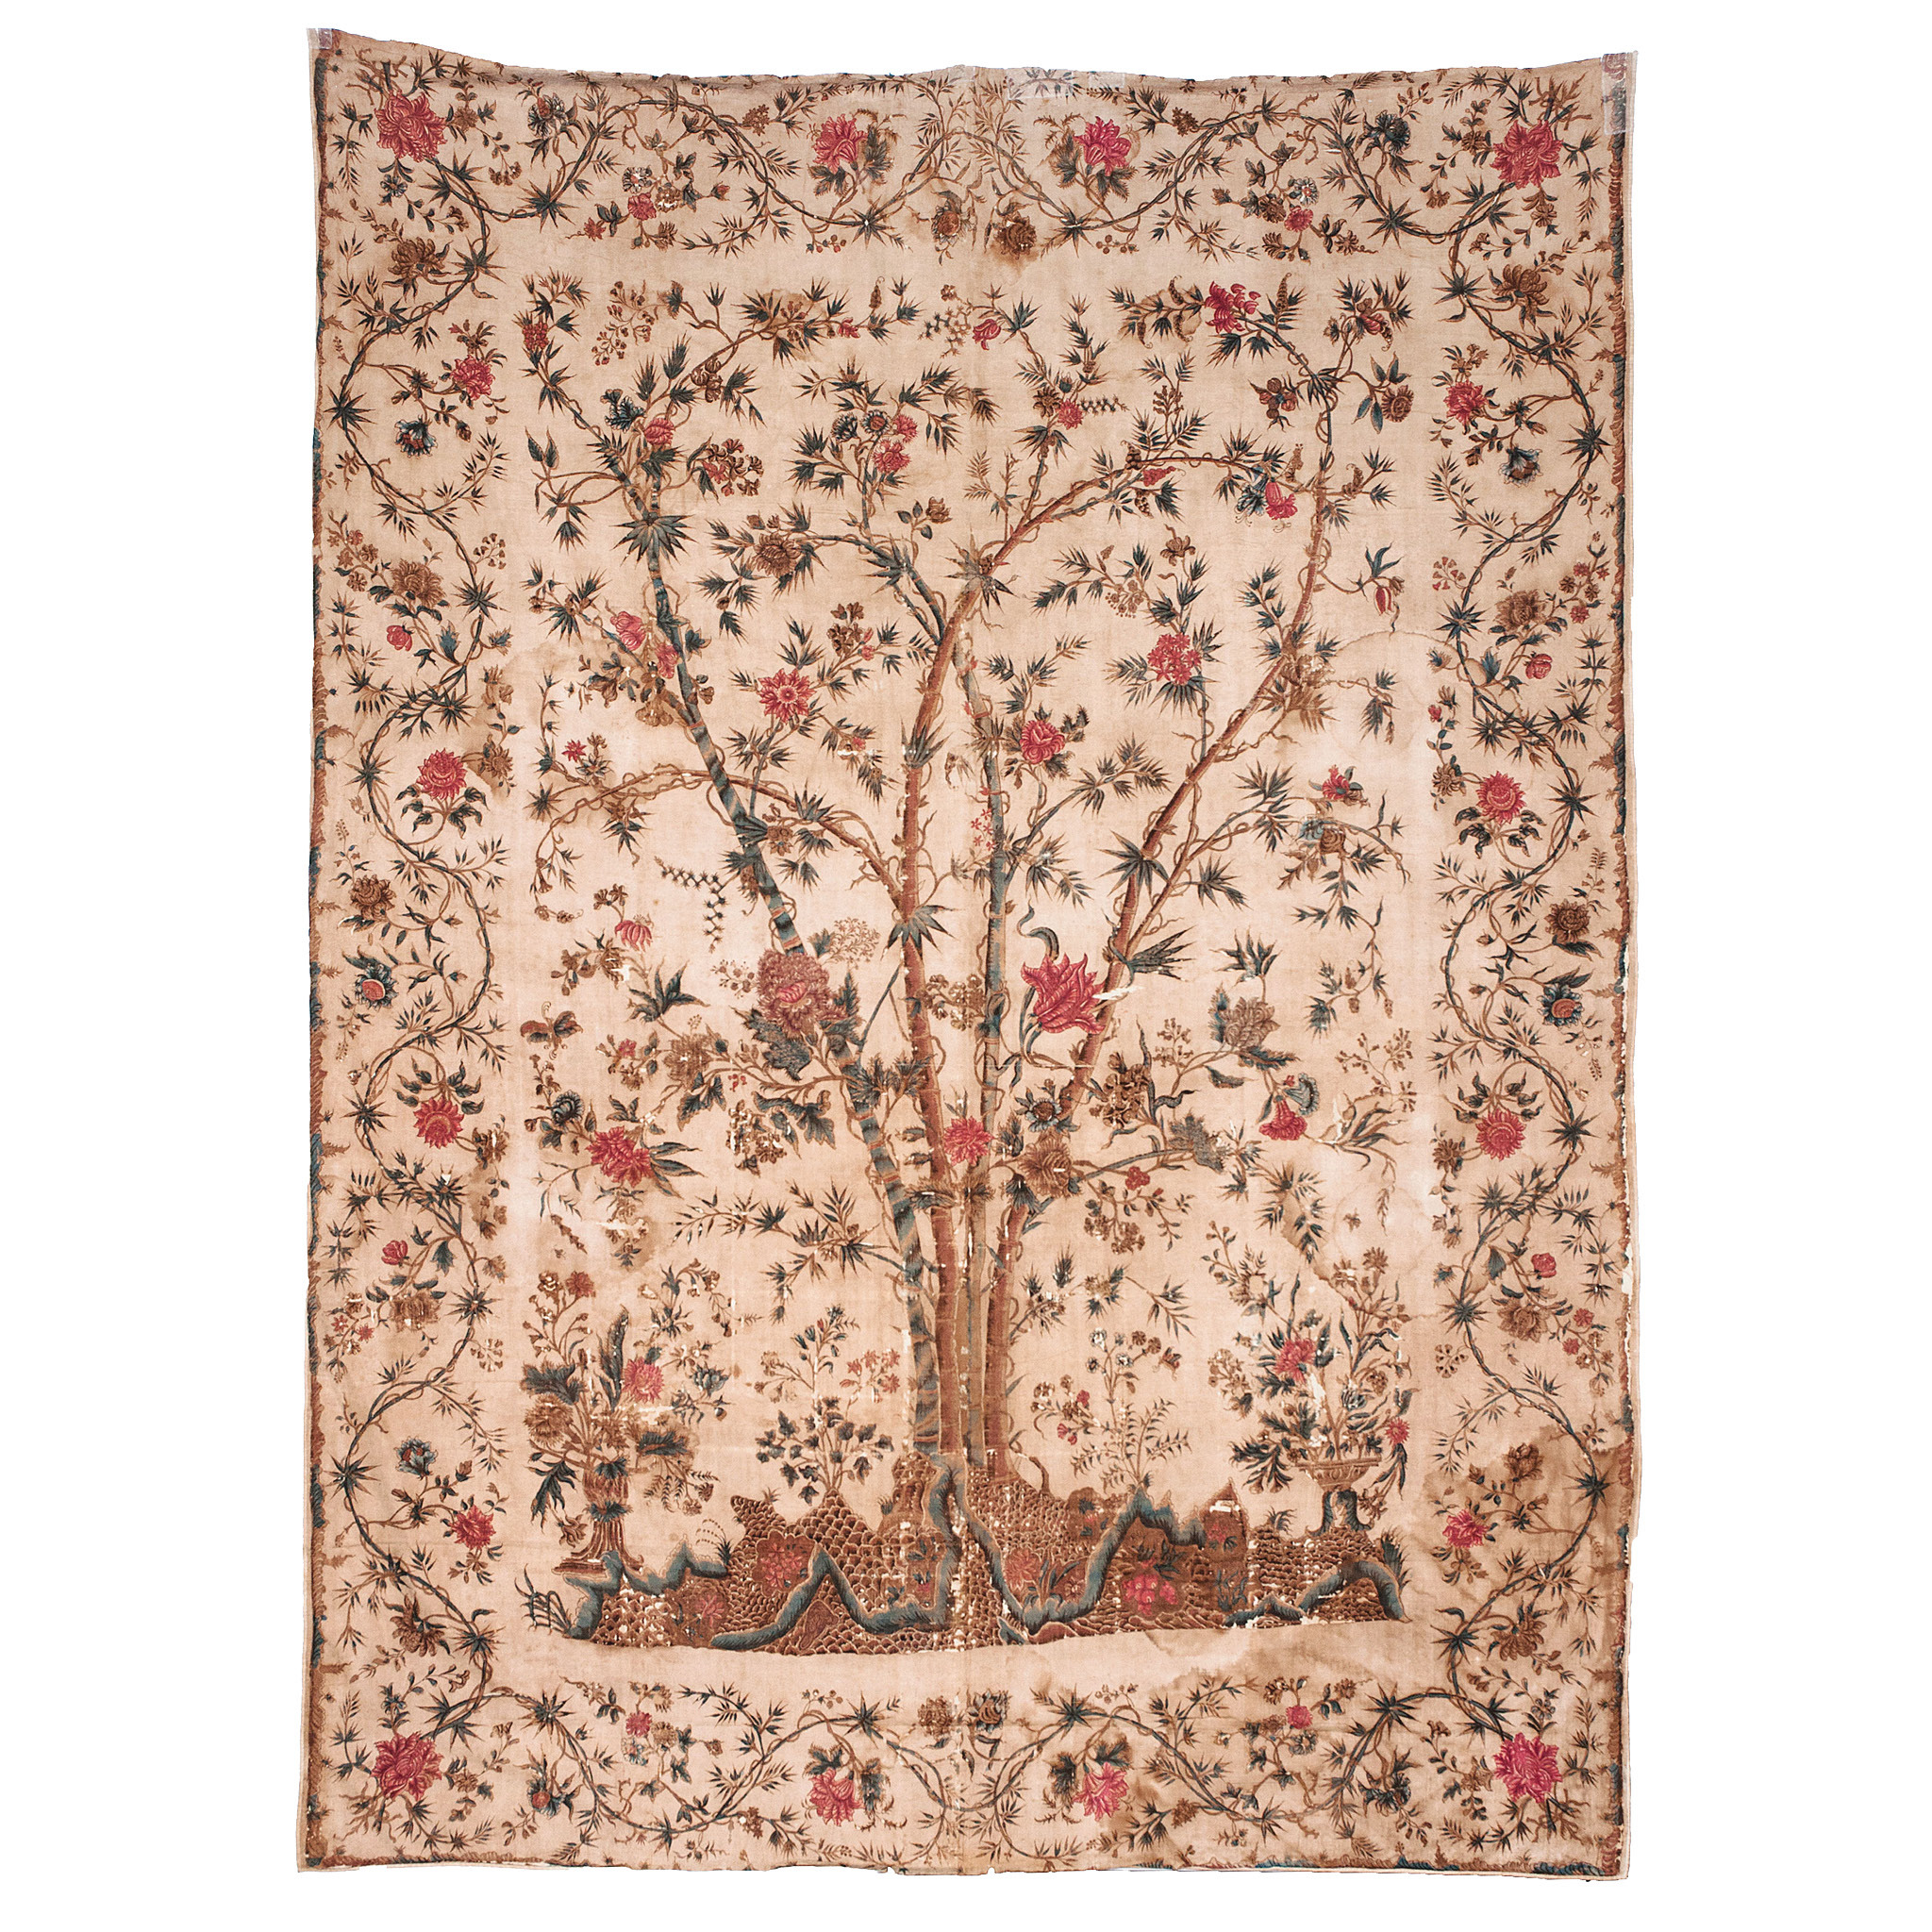 <br>Tree of Life Palampore (Bed Cover), late 18th century<br> Maker Unknown, sold by United East India Company<br><i>Gift of E. Milby Burton, 1958</i><br>